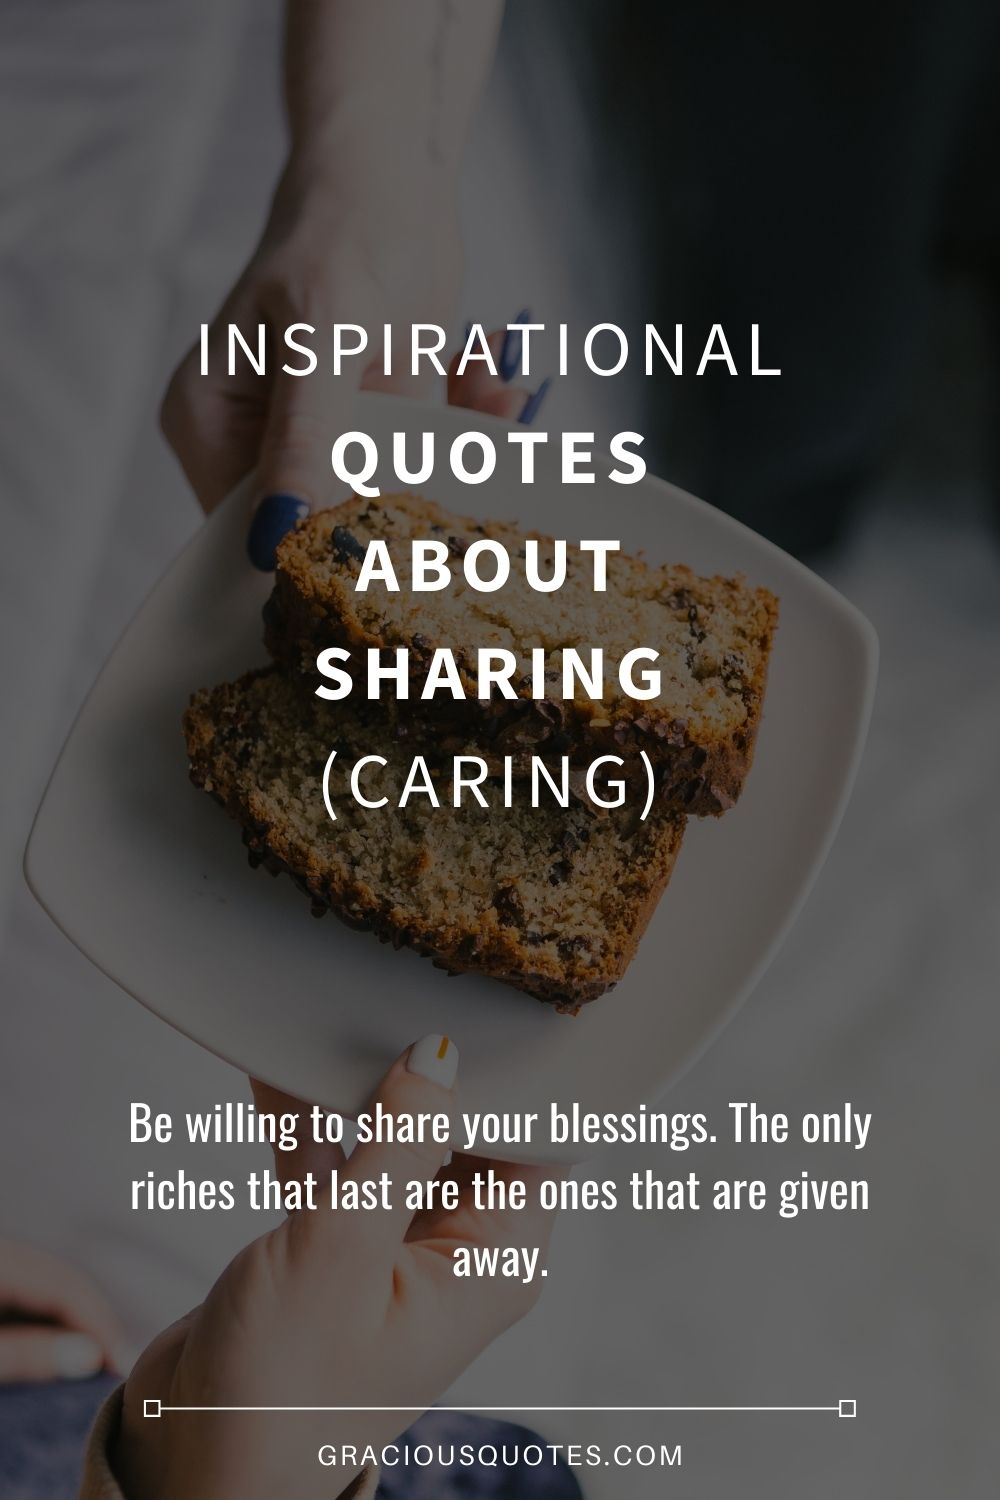 77 Inspirational Quotes About Sharing (CARING)